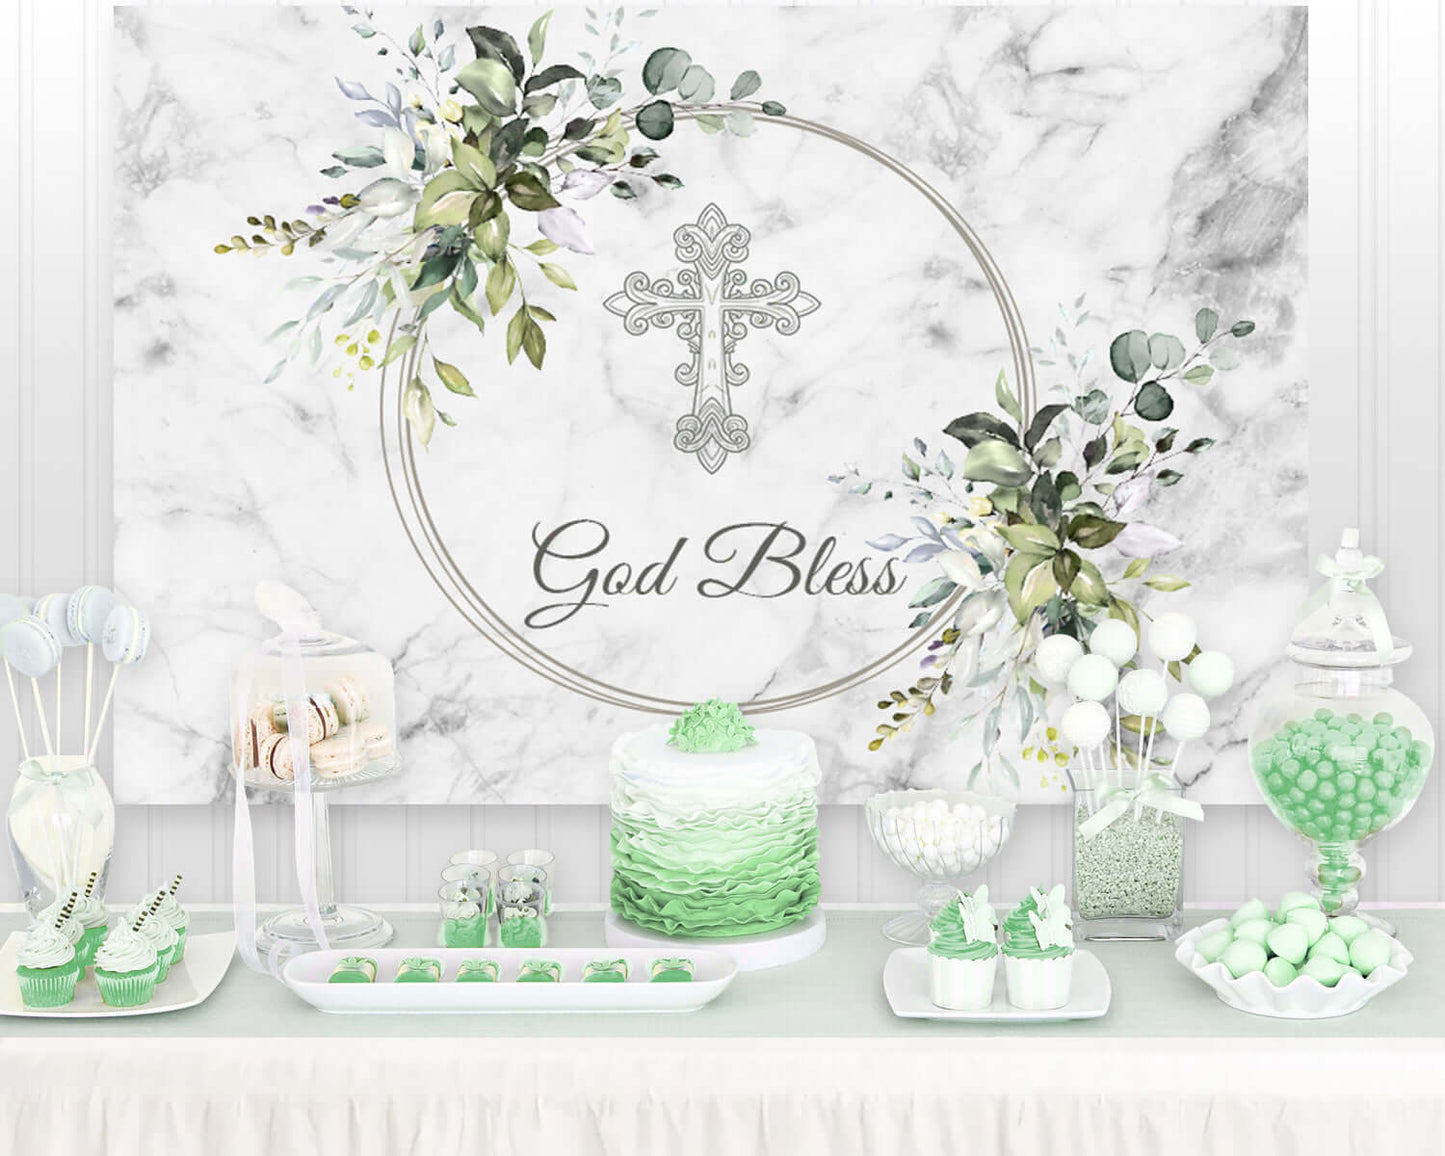 Sensfun First Holy Communion Backdrops Party Decoration Cake Table Banner Silver Cross Marble Green Leaves God Bless Photography Backgrounds